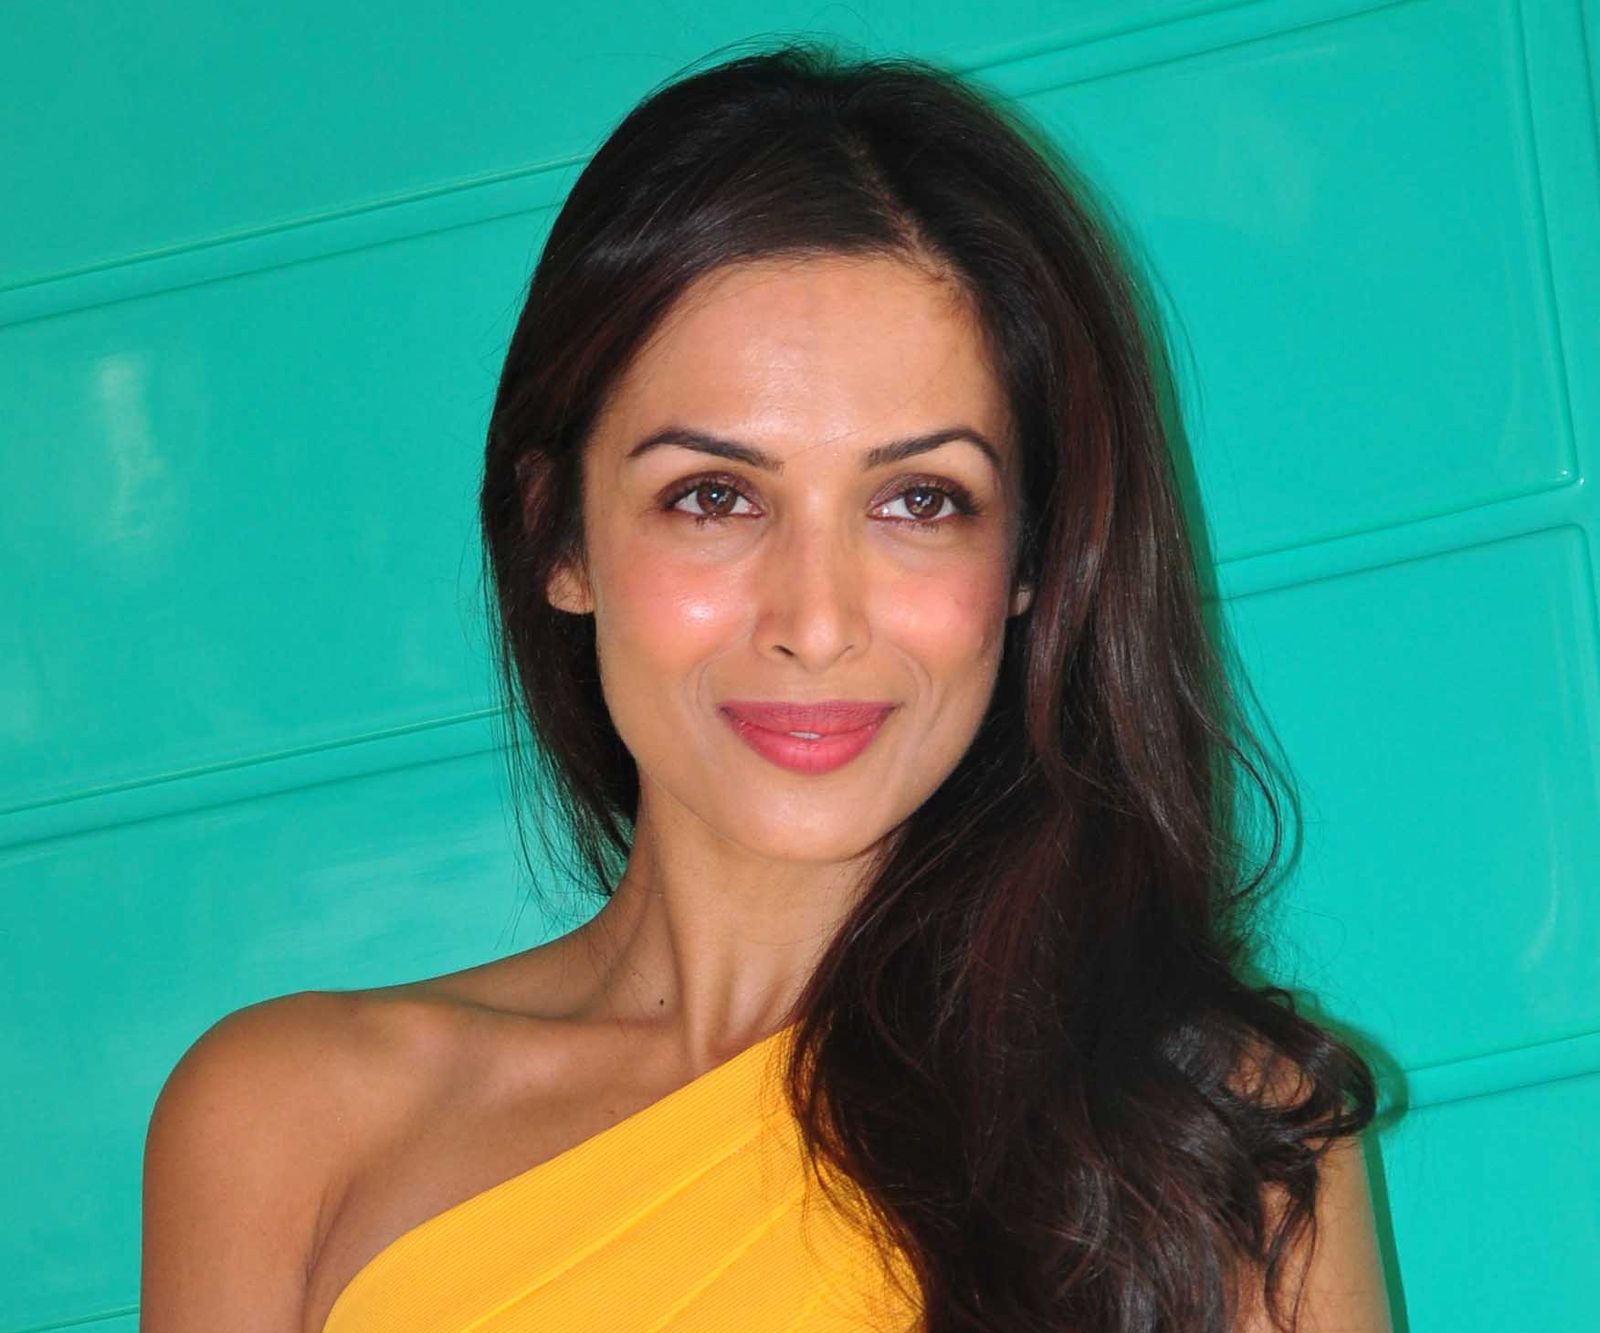 Malaika Arora To Launch An App Designed To Share Her Fitness Regime